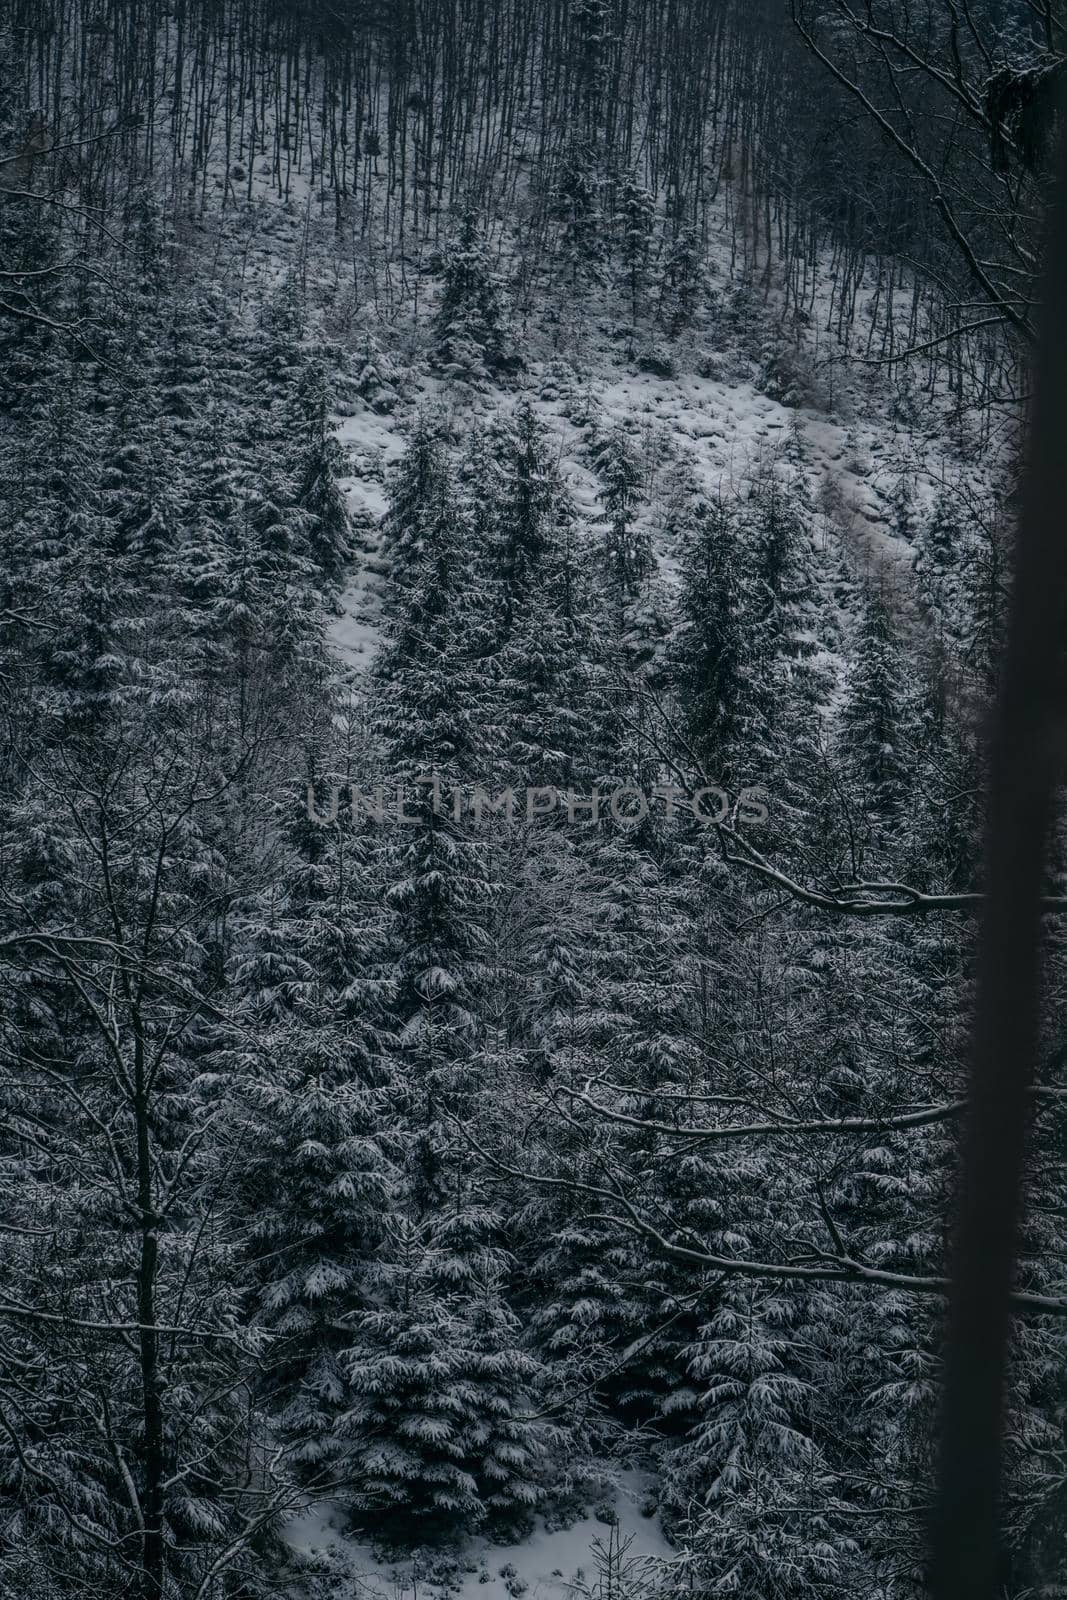 Winter Dark forest with pine trees. High quality photo